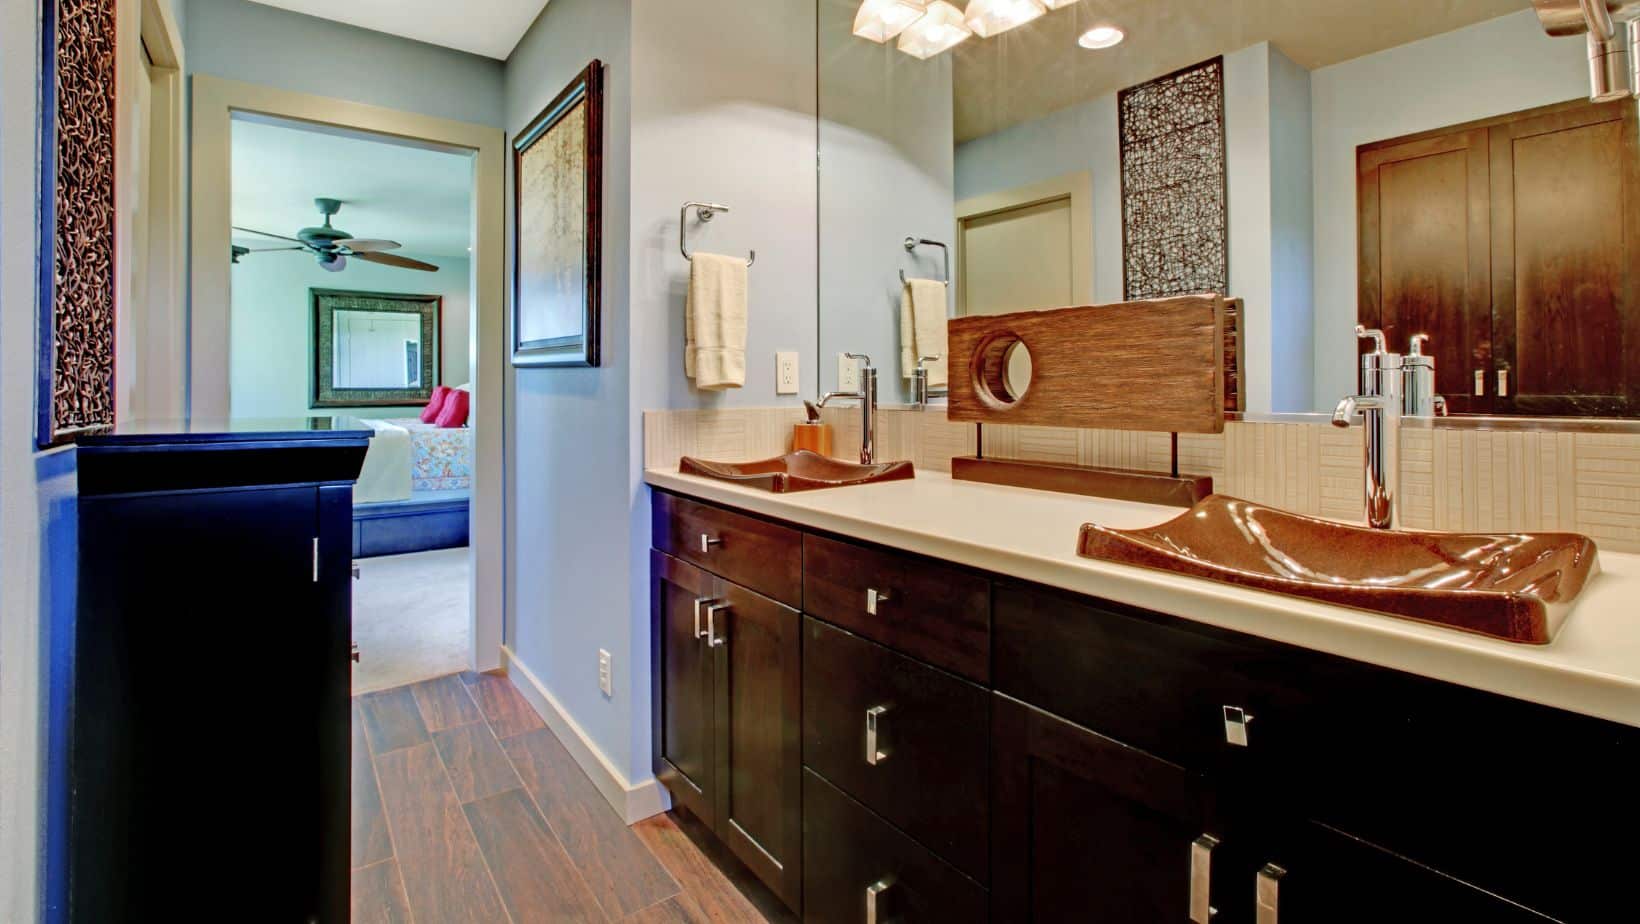 Traditional style bathroom with dark brown double-sink cabinets